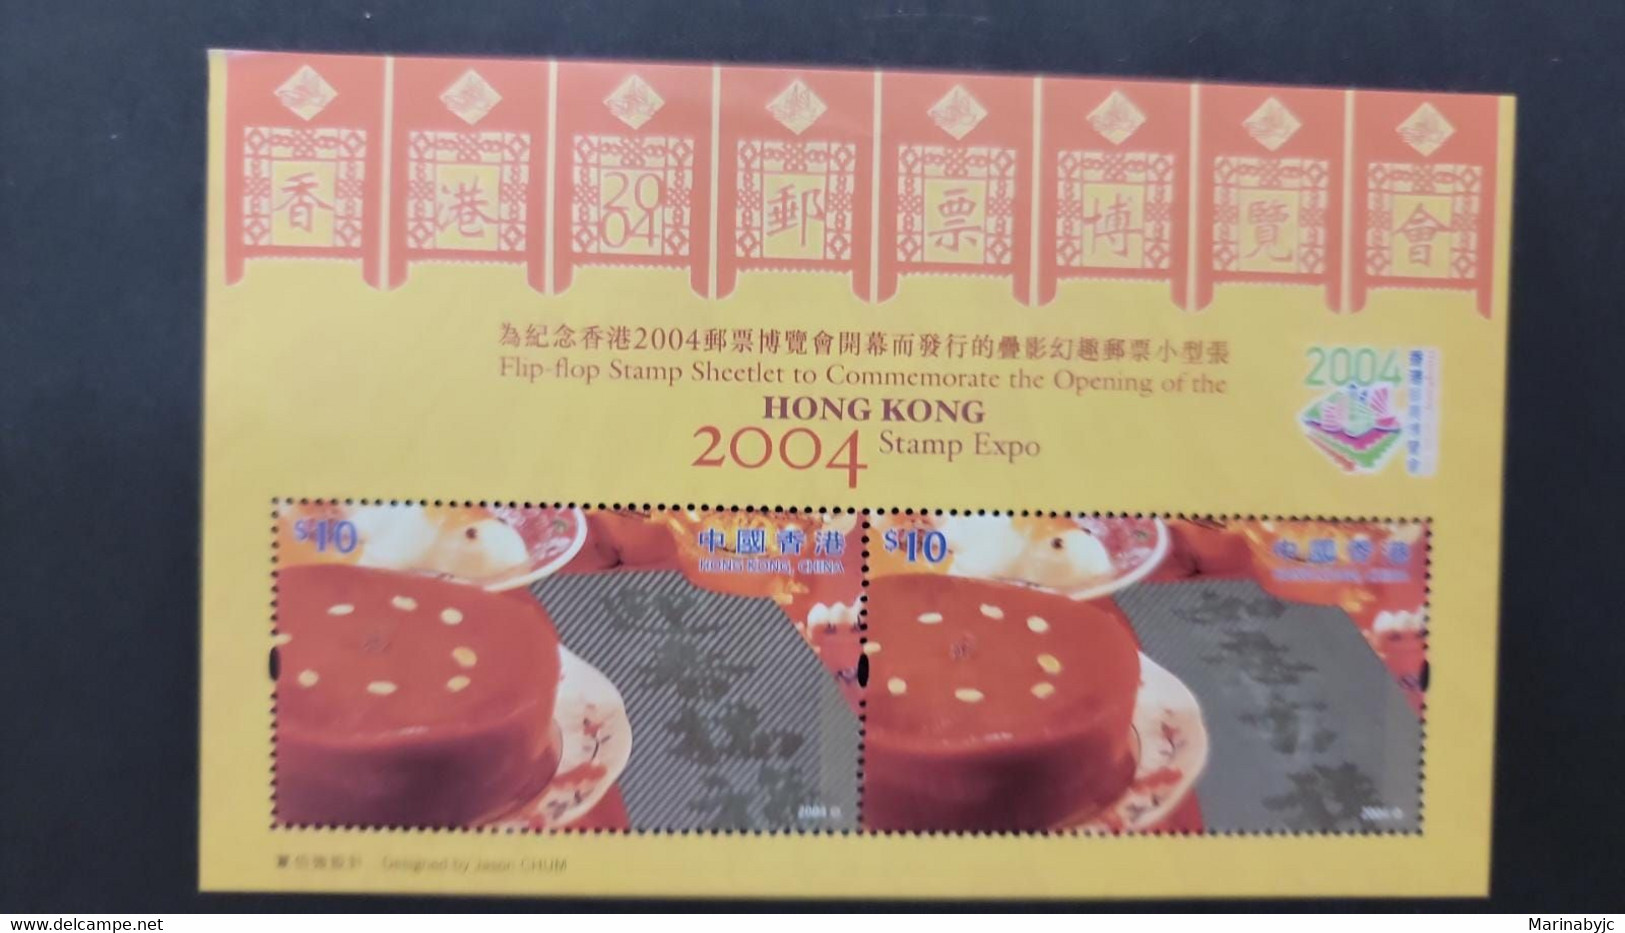 SO) 2004 HONG KONG, FLIP-FLOP STAMP SHEET TO COMMEMORATE THE OPENING OF THE HONG KONG STAMP EXPO 2004, MNH - Gebraucht